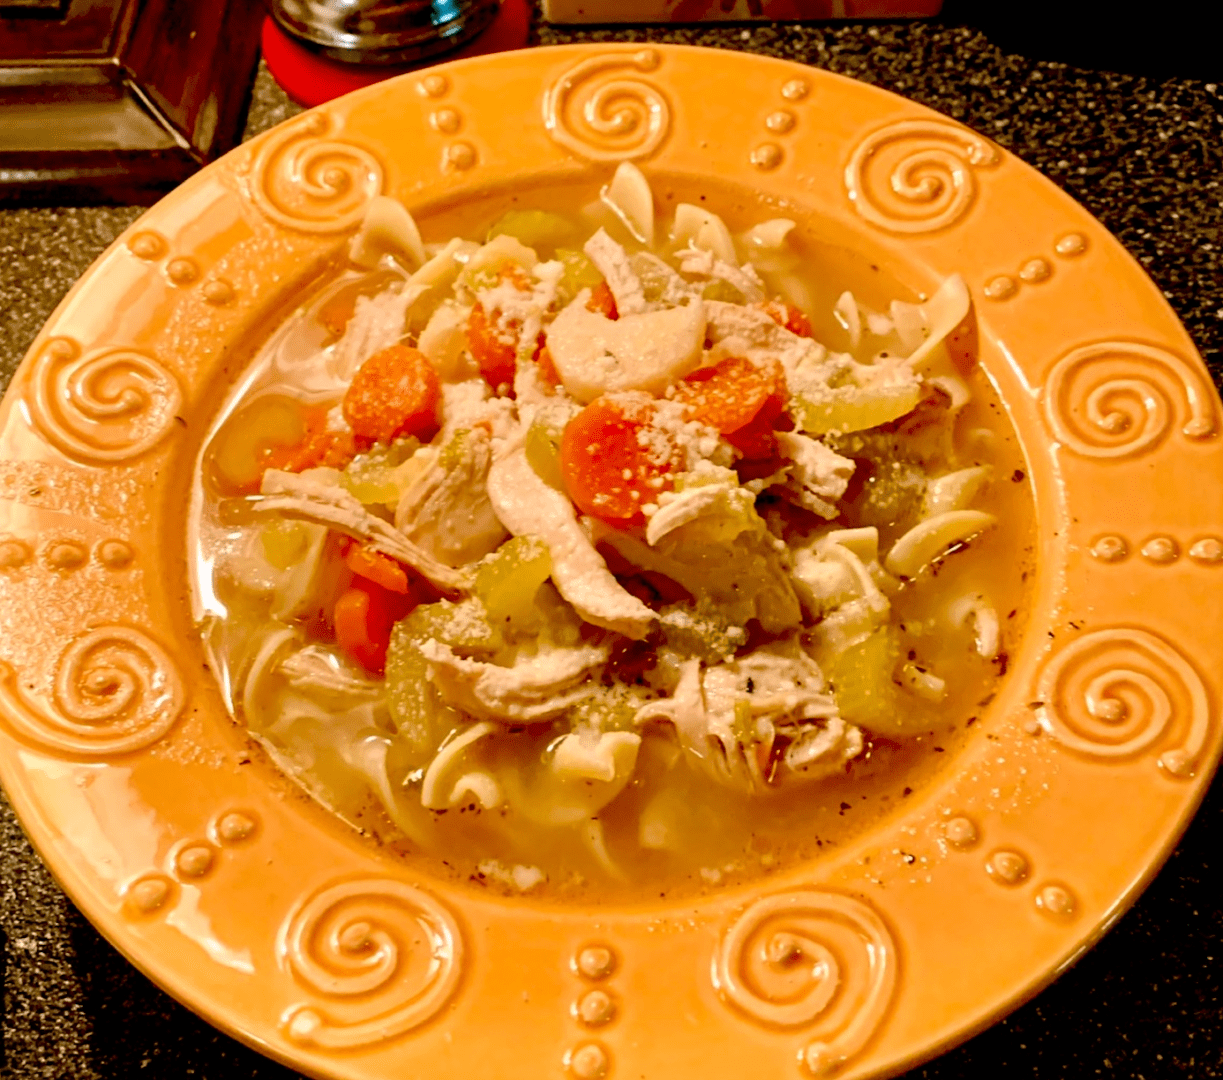 A bowl of chicken noodle soup on a table.